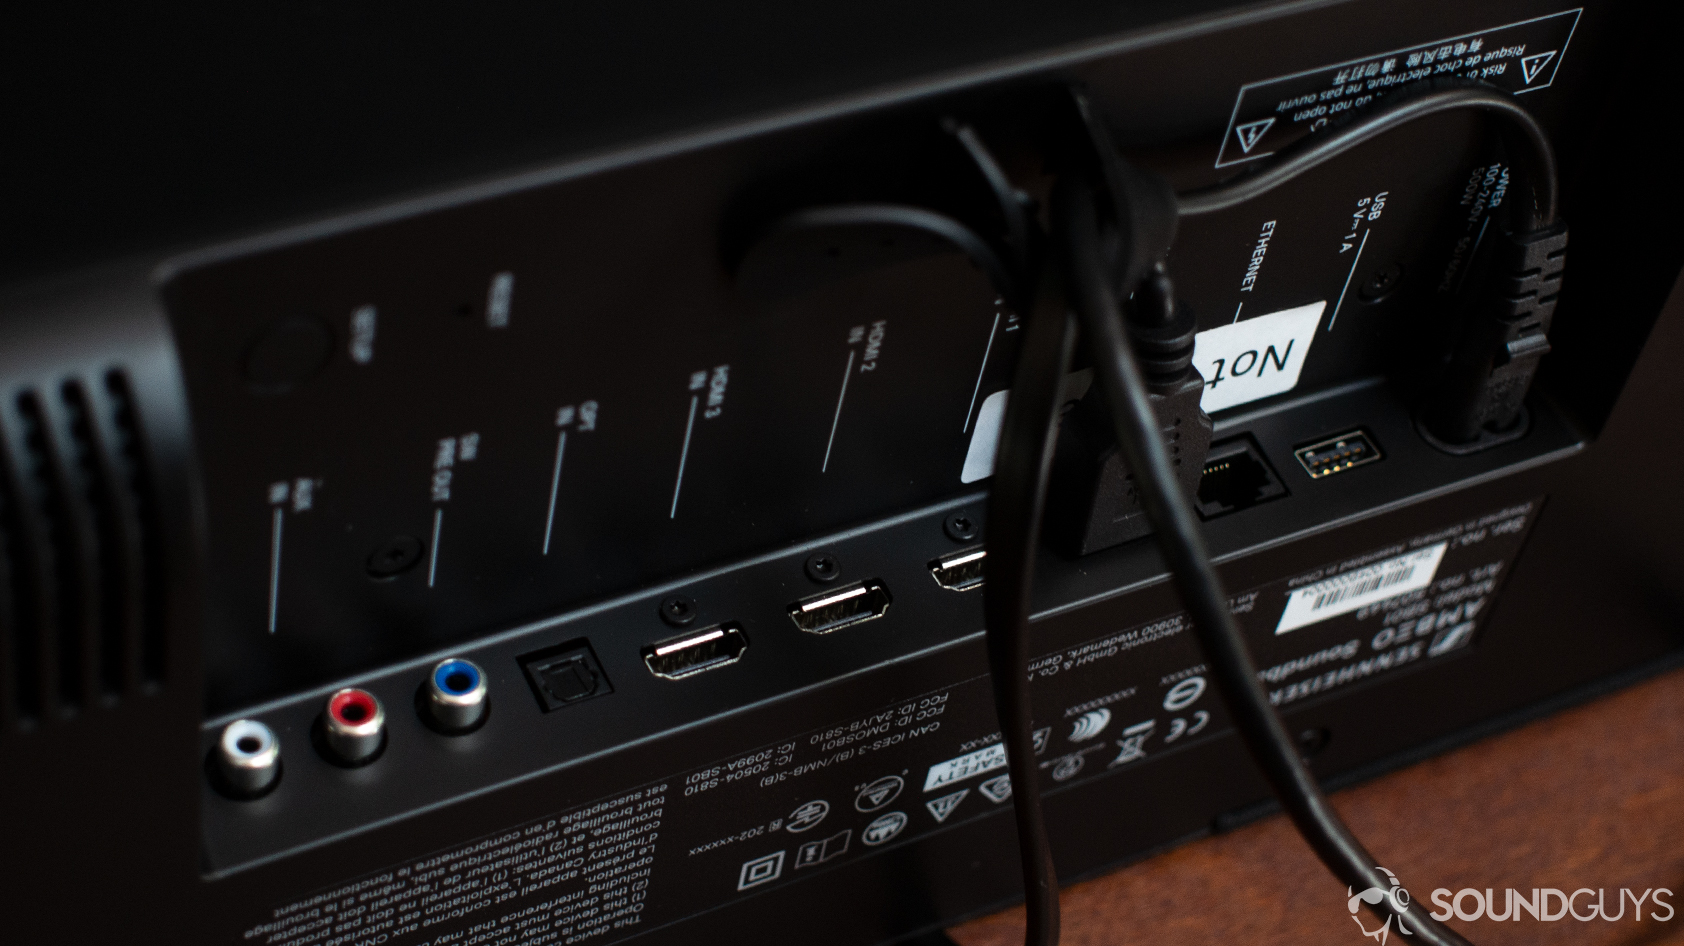 A photo of the ports and cable management system of the Sennheiser Ambeo Soundbar.